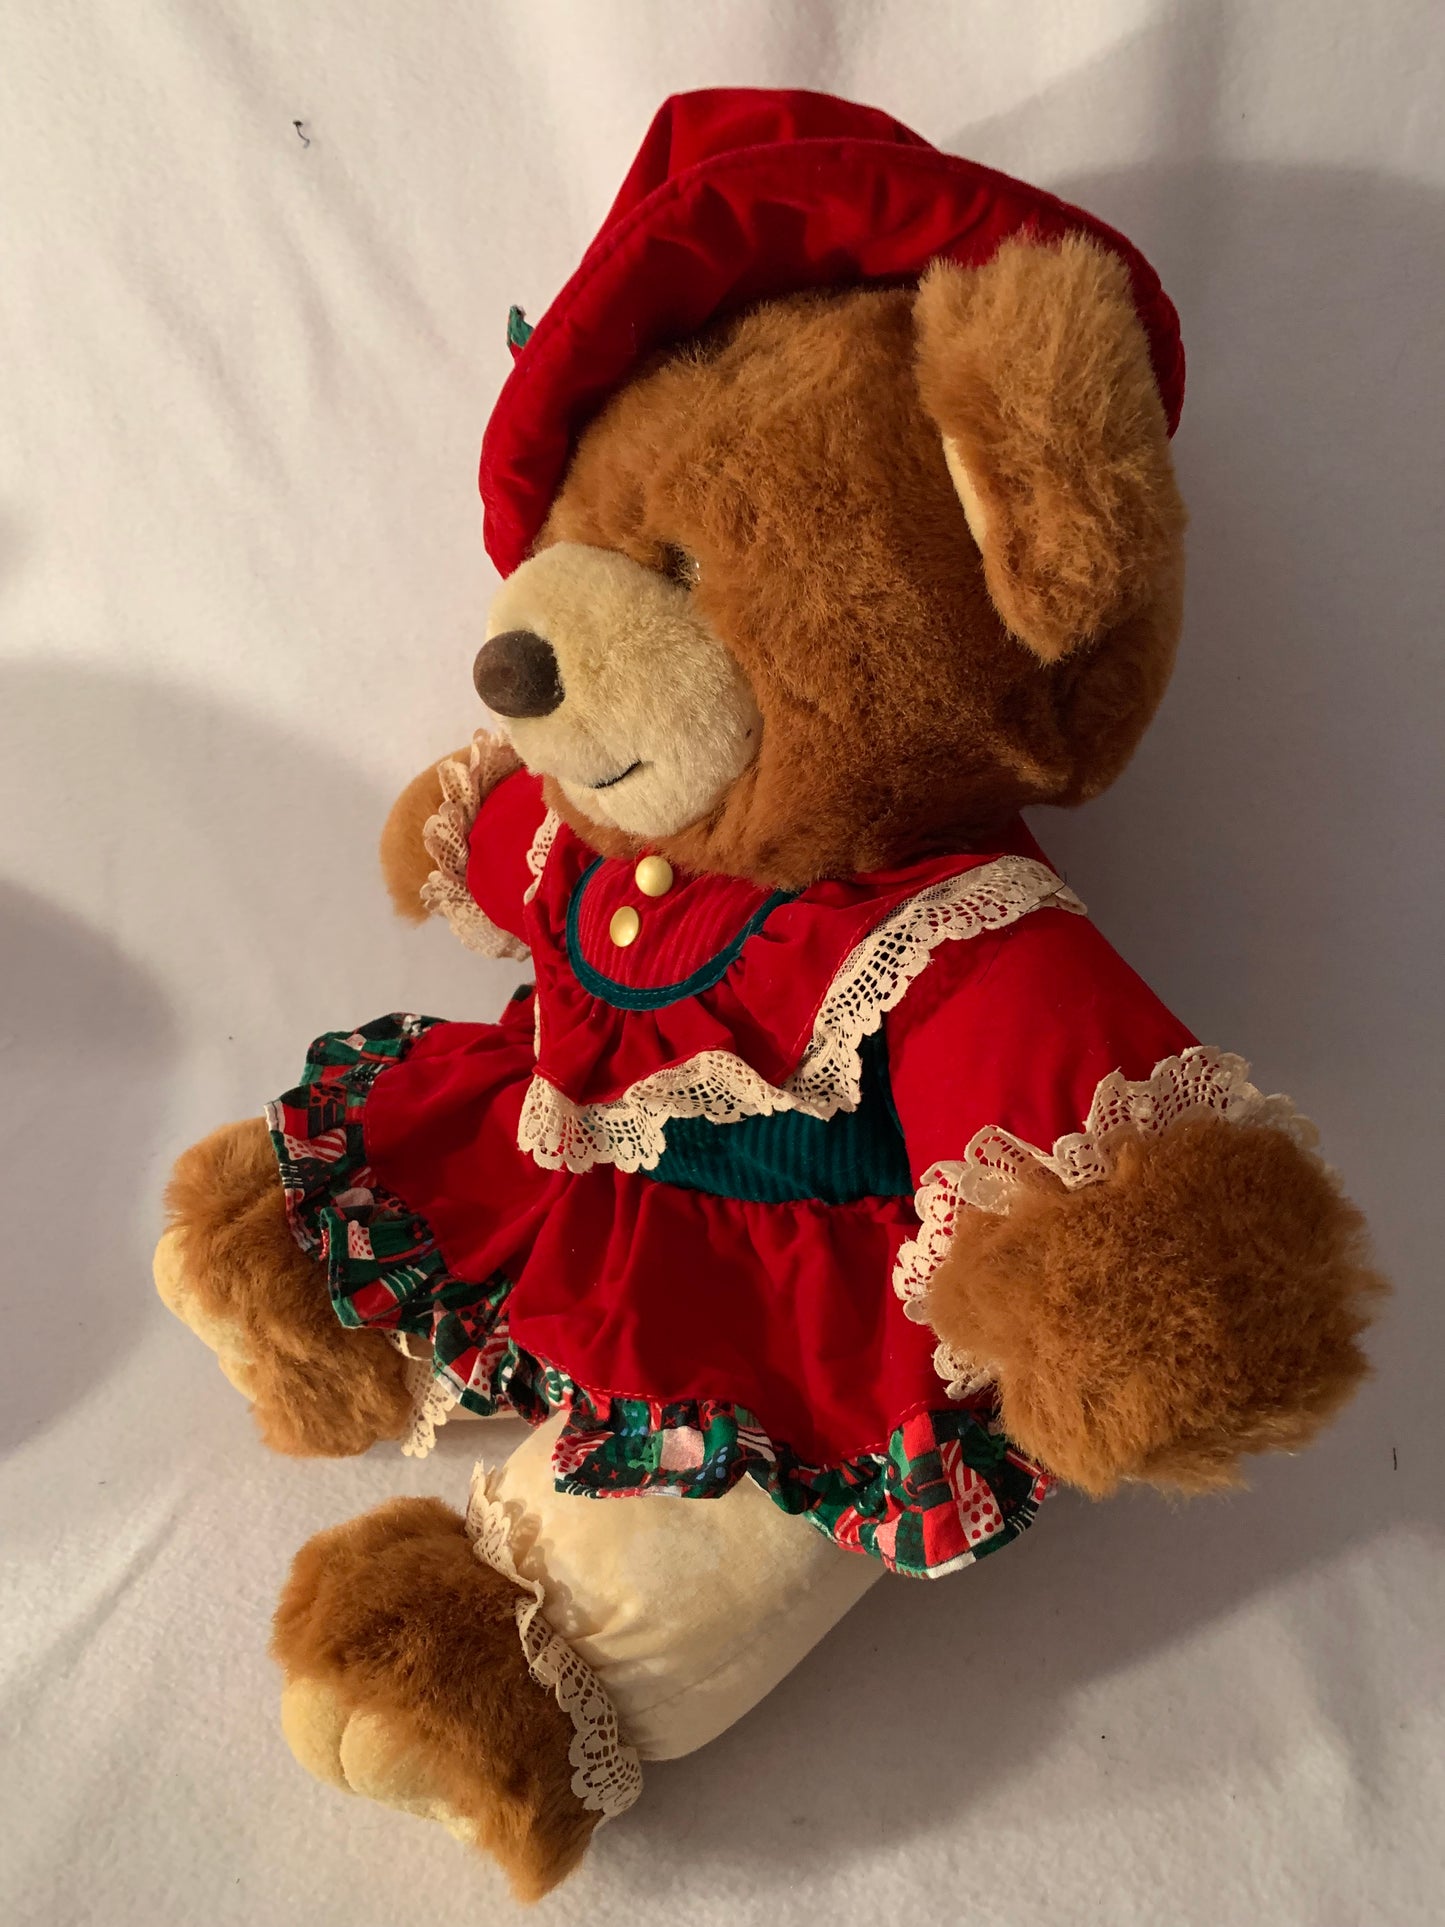 Weighted stuffed animal, snowman or girl bear with 10 lbs, reindeer or dancer with 4 lbs, washable plush, Christmas buddies